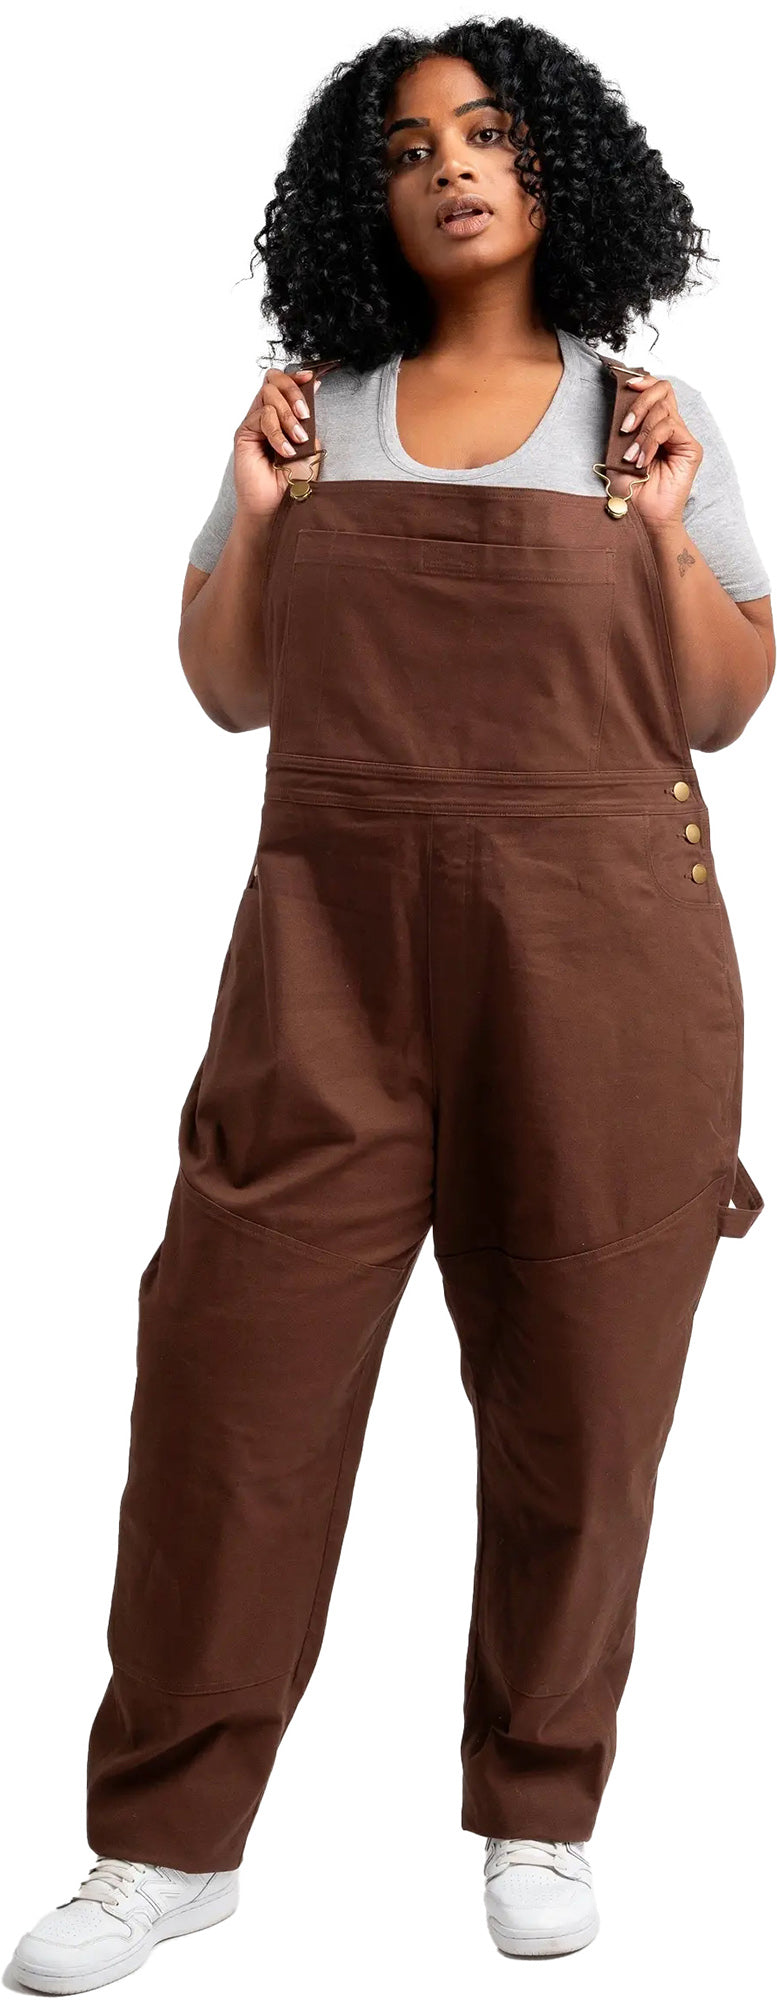 Patagonia Stand Up Cropped Overalls Women's